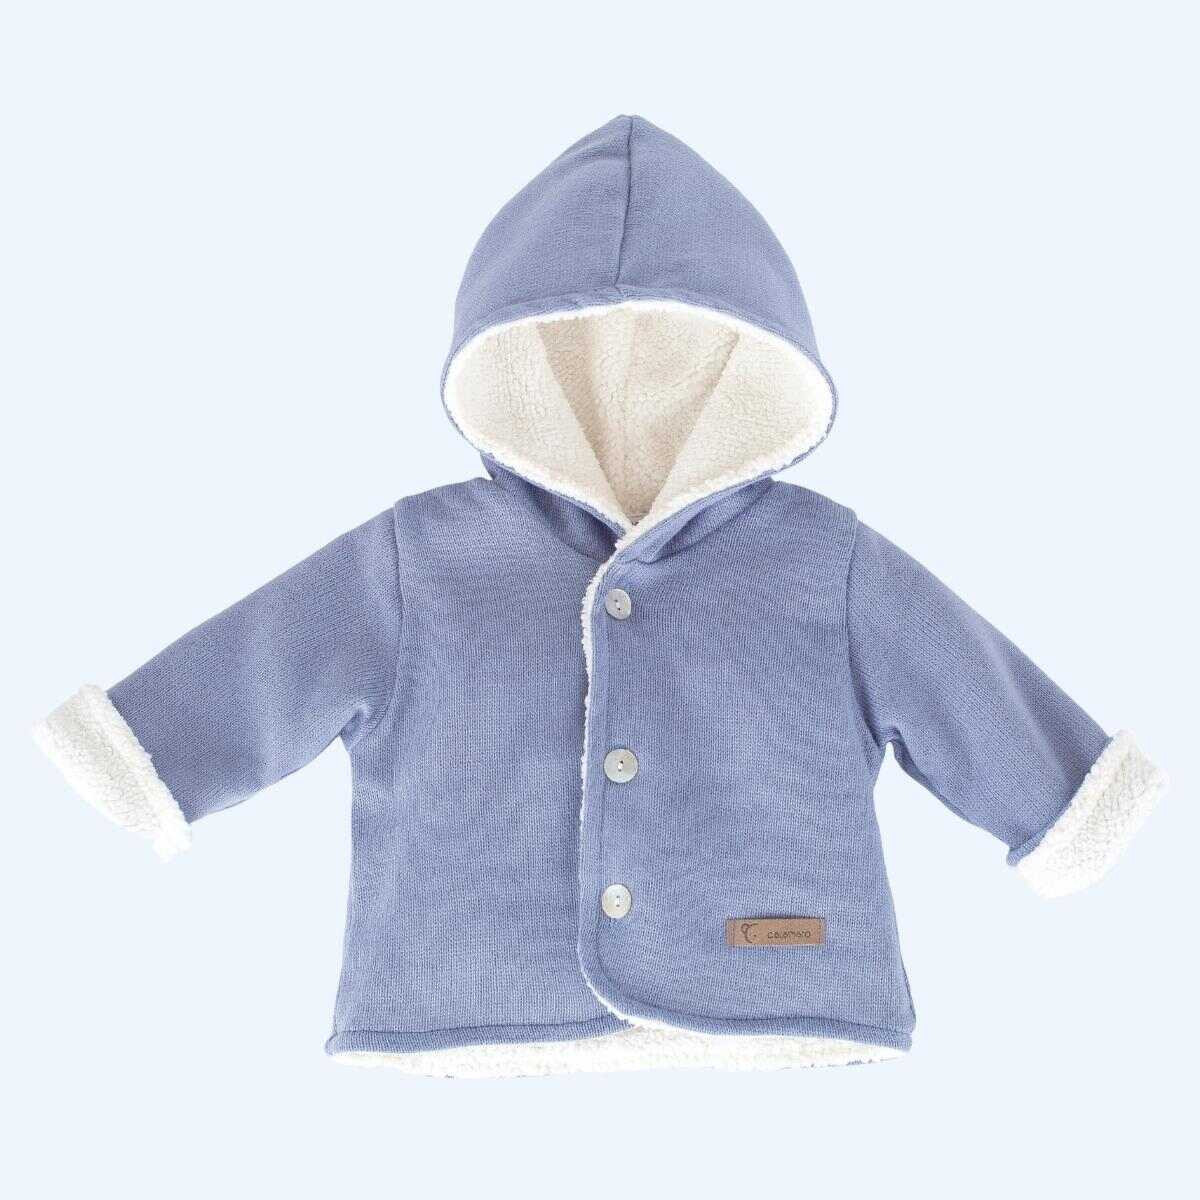 copy of BOYS AND GIRLS ONIS JACKET WITH HOOD CALAMARO - 2